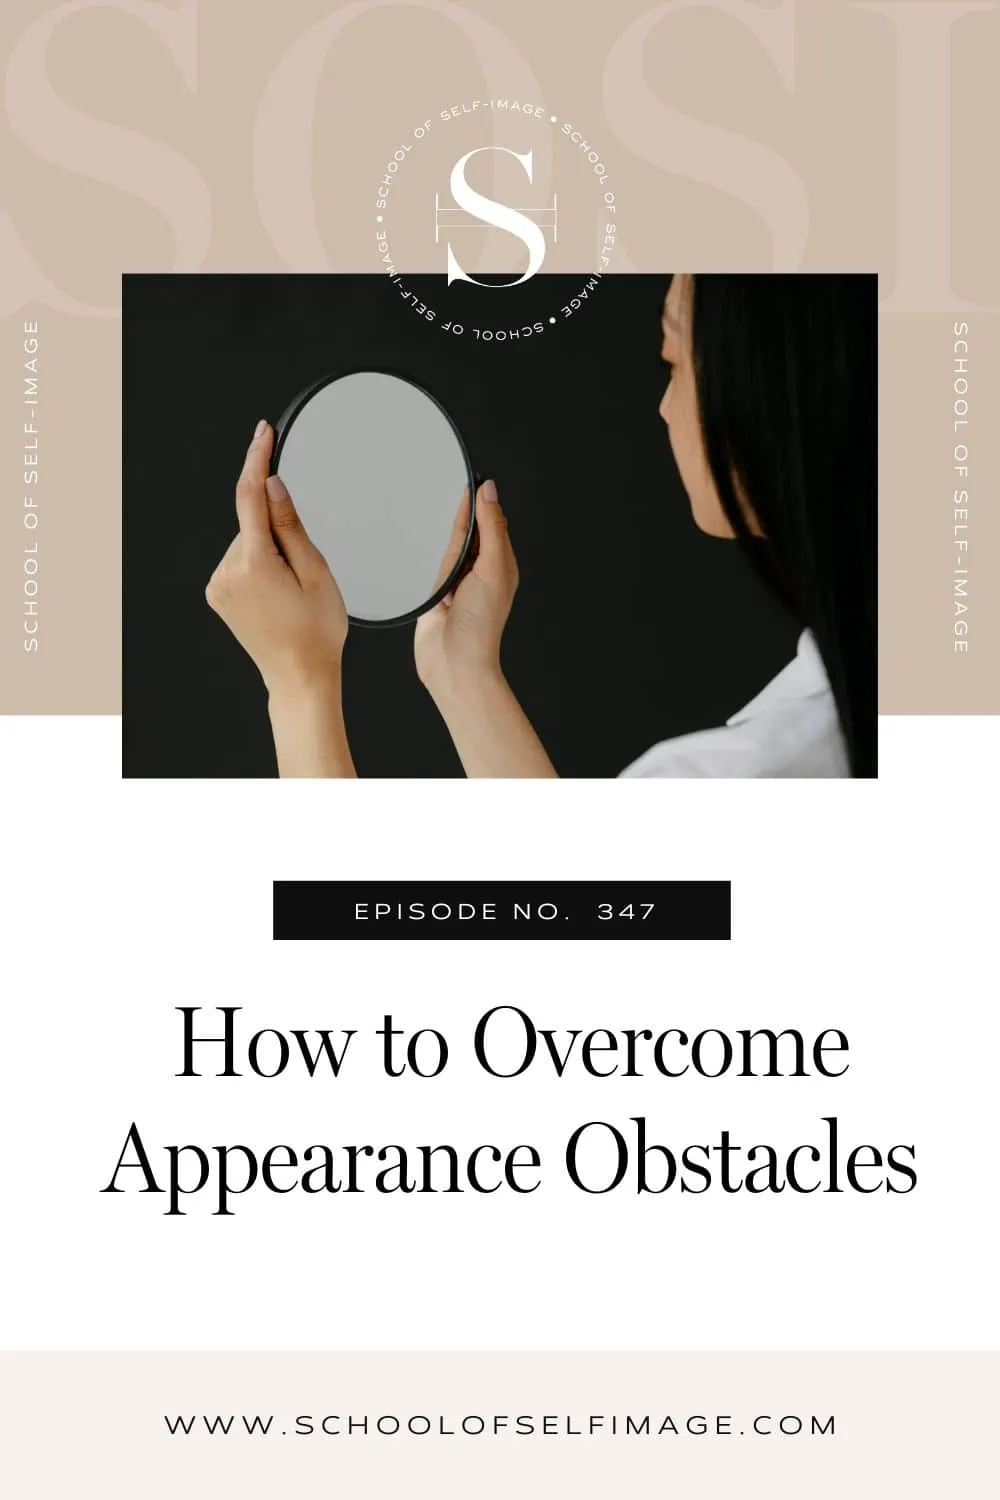 How to Overcome Appearance Obstacles